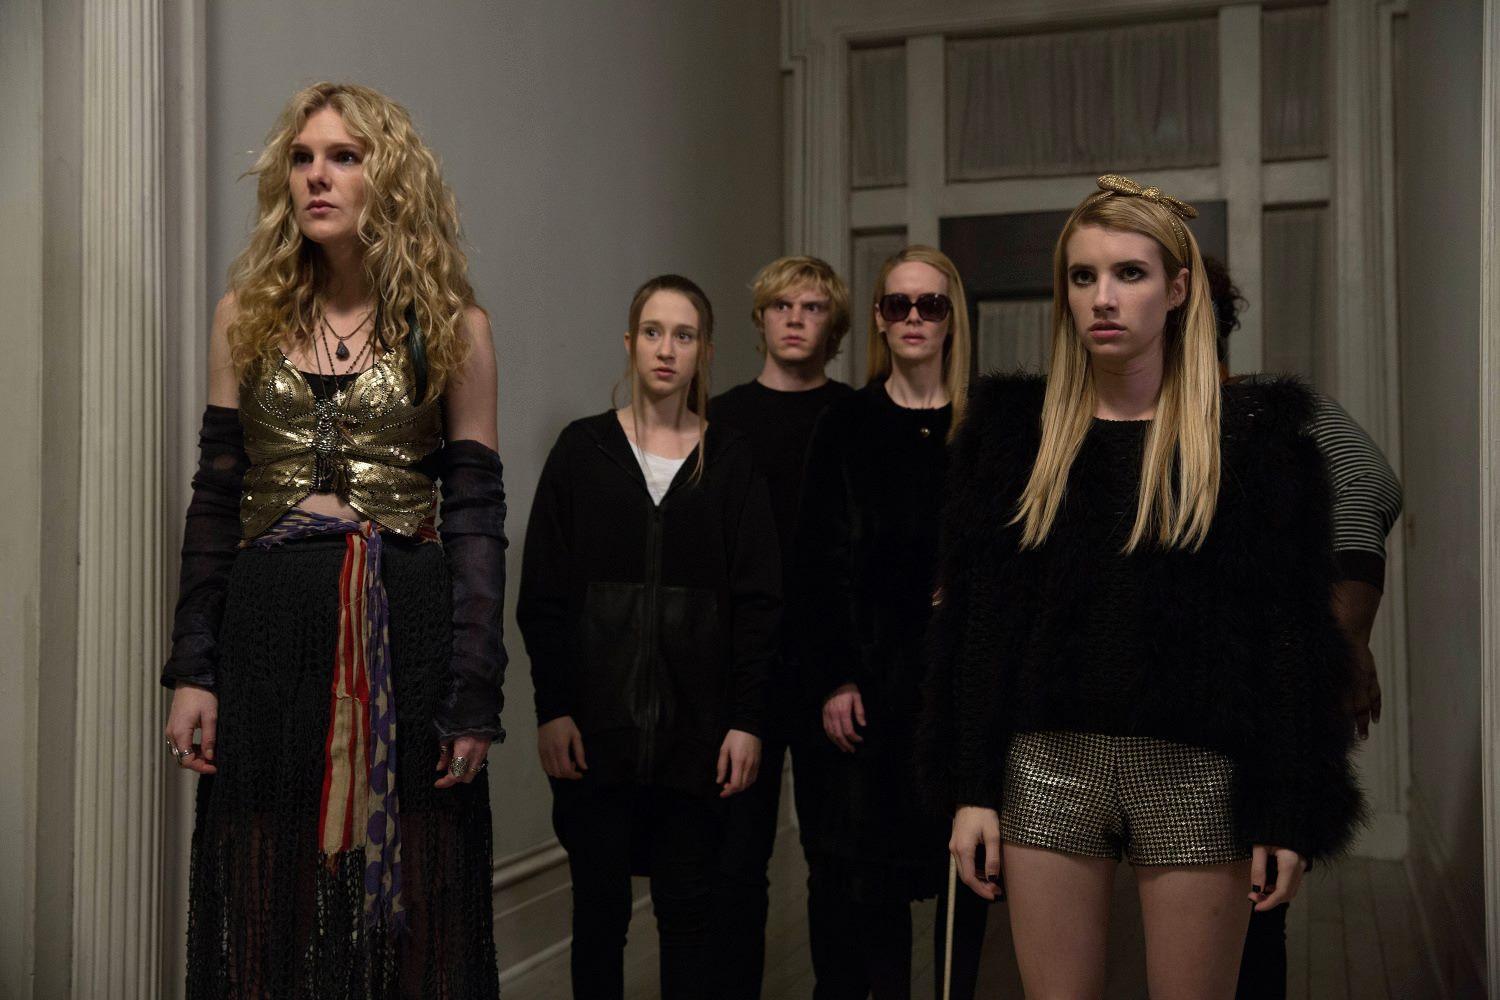 facebook.comThe witches of Miss Robichaux’s Academy face the Seven Wonders in “American Horror Story: Coven."